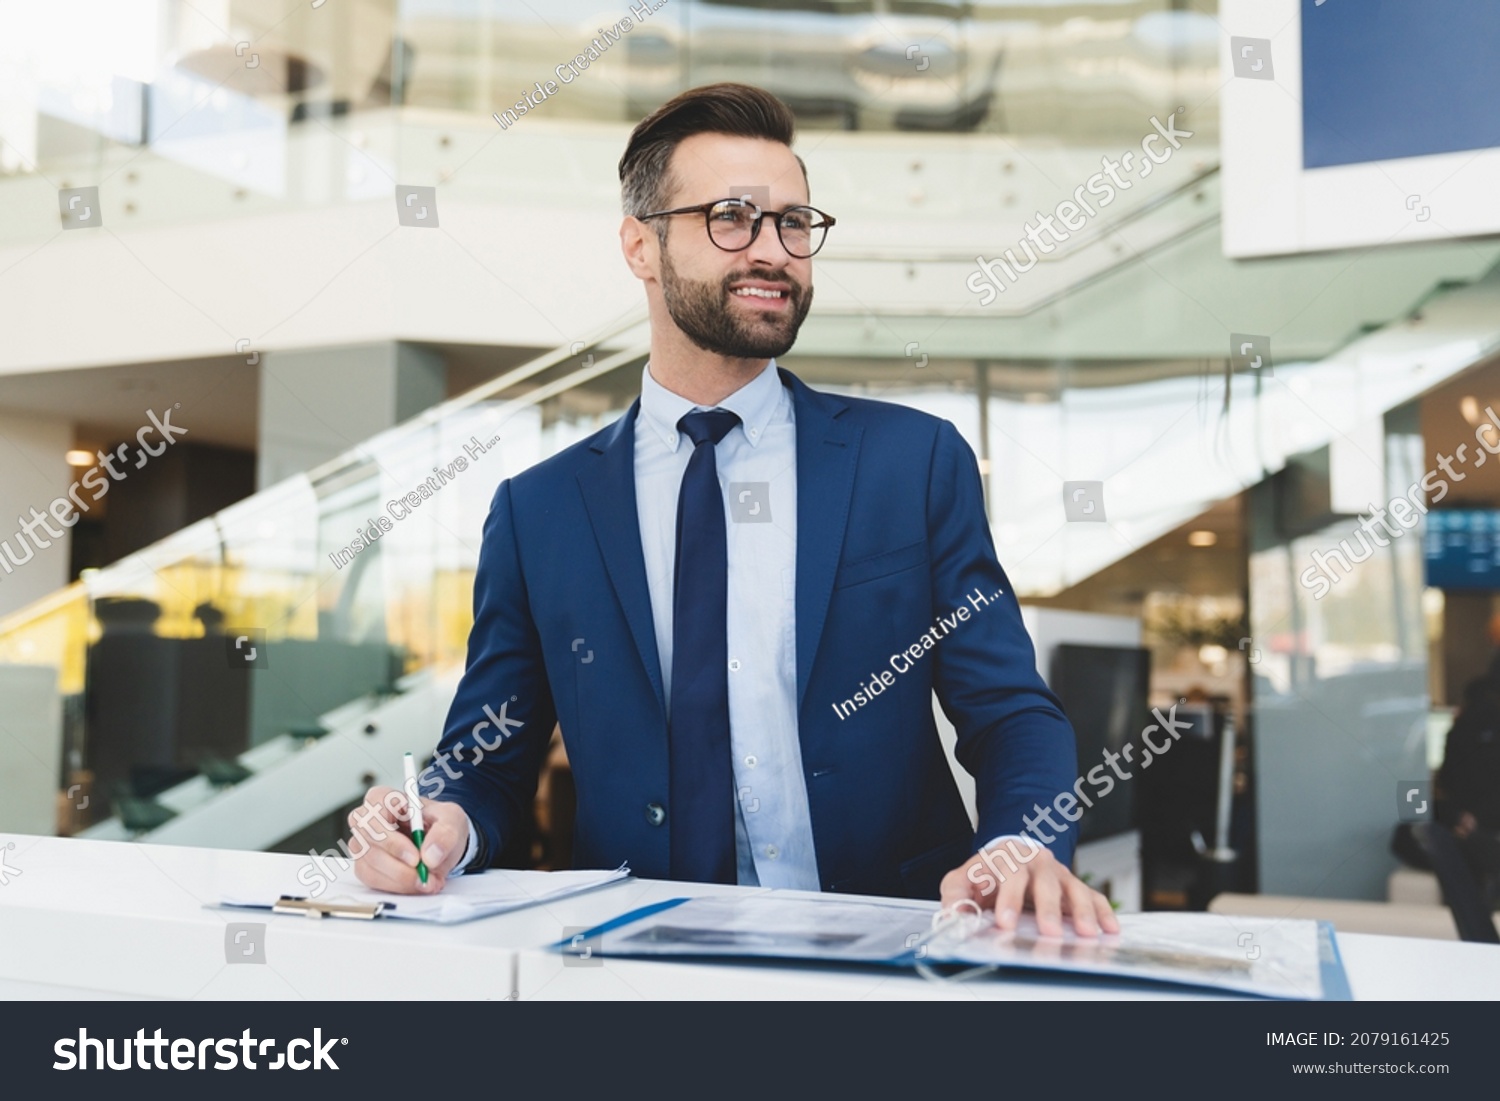 Successful caucasian smiling man shop assistant receptionist in formal attire writing while standing at reception desk in hotel car dealer shop #2079161425